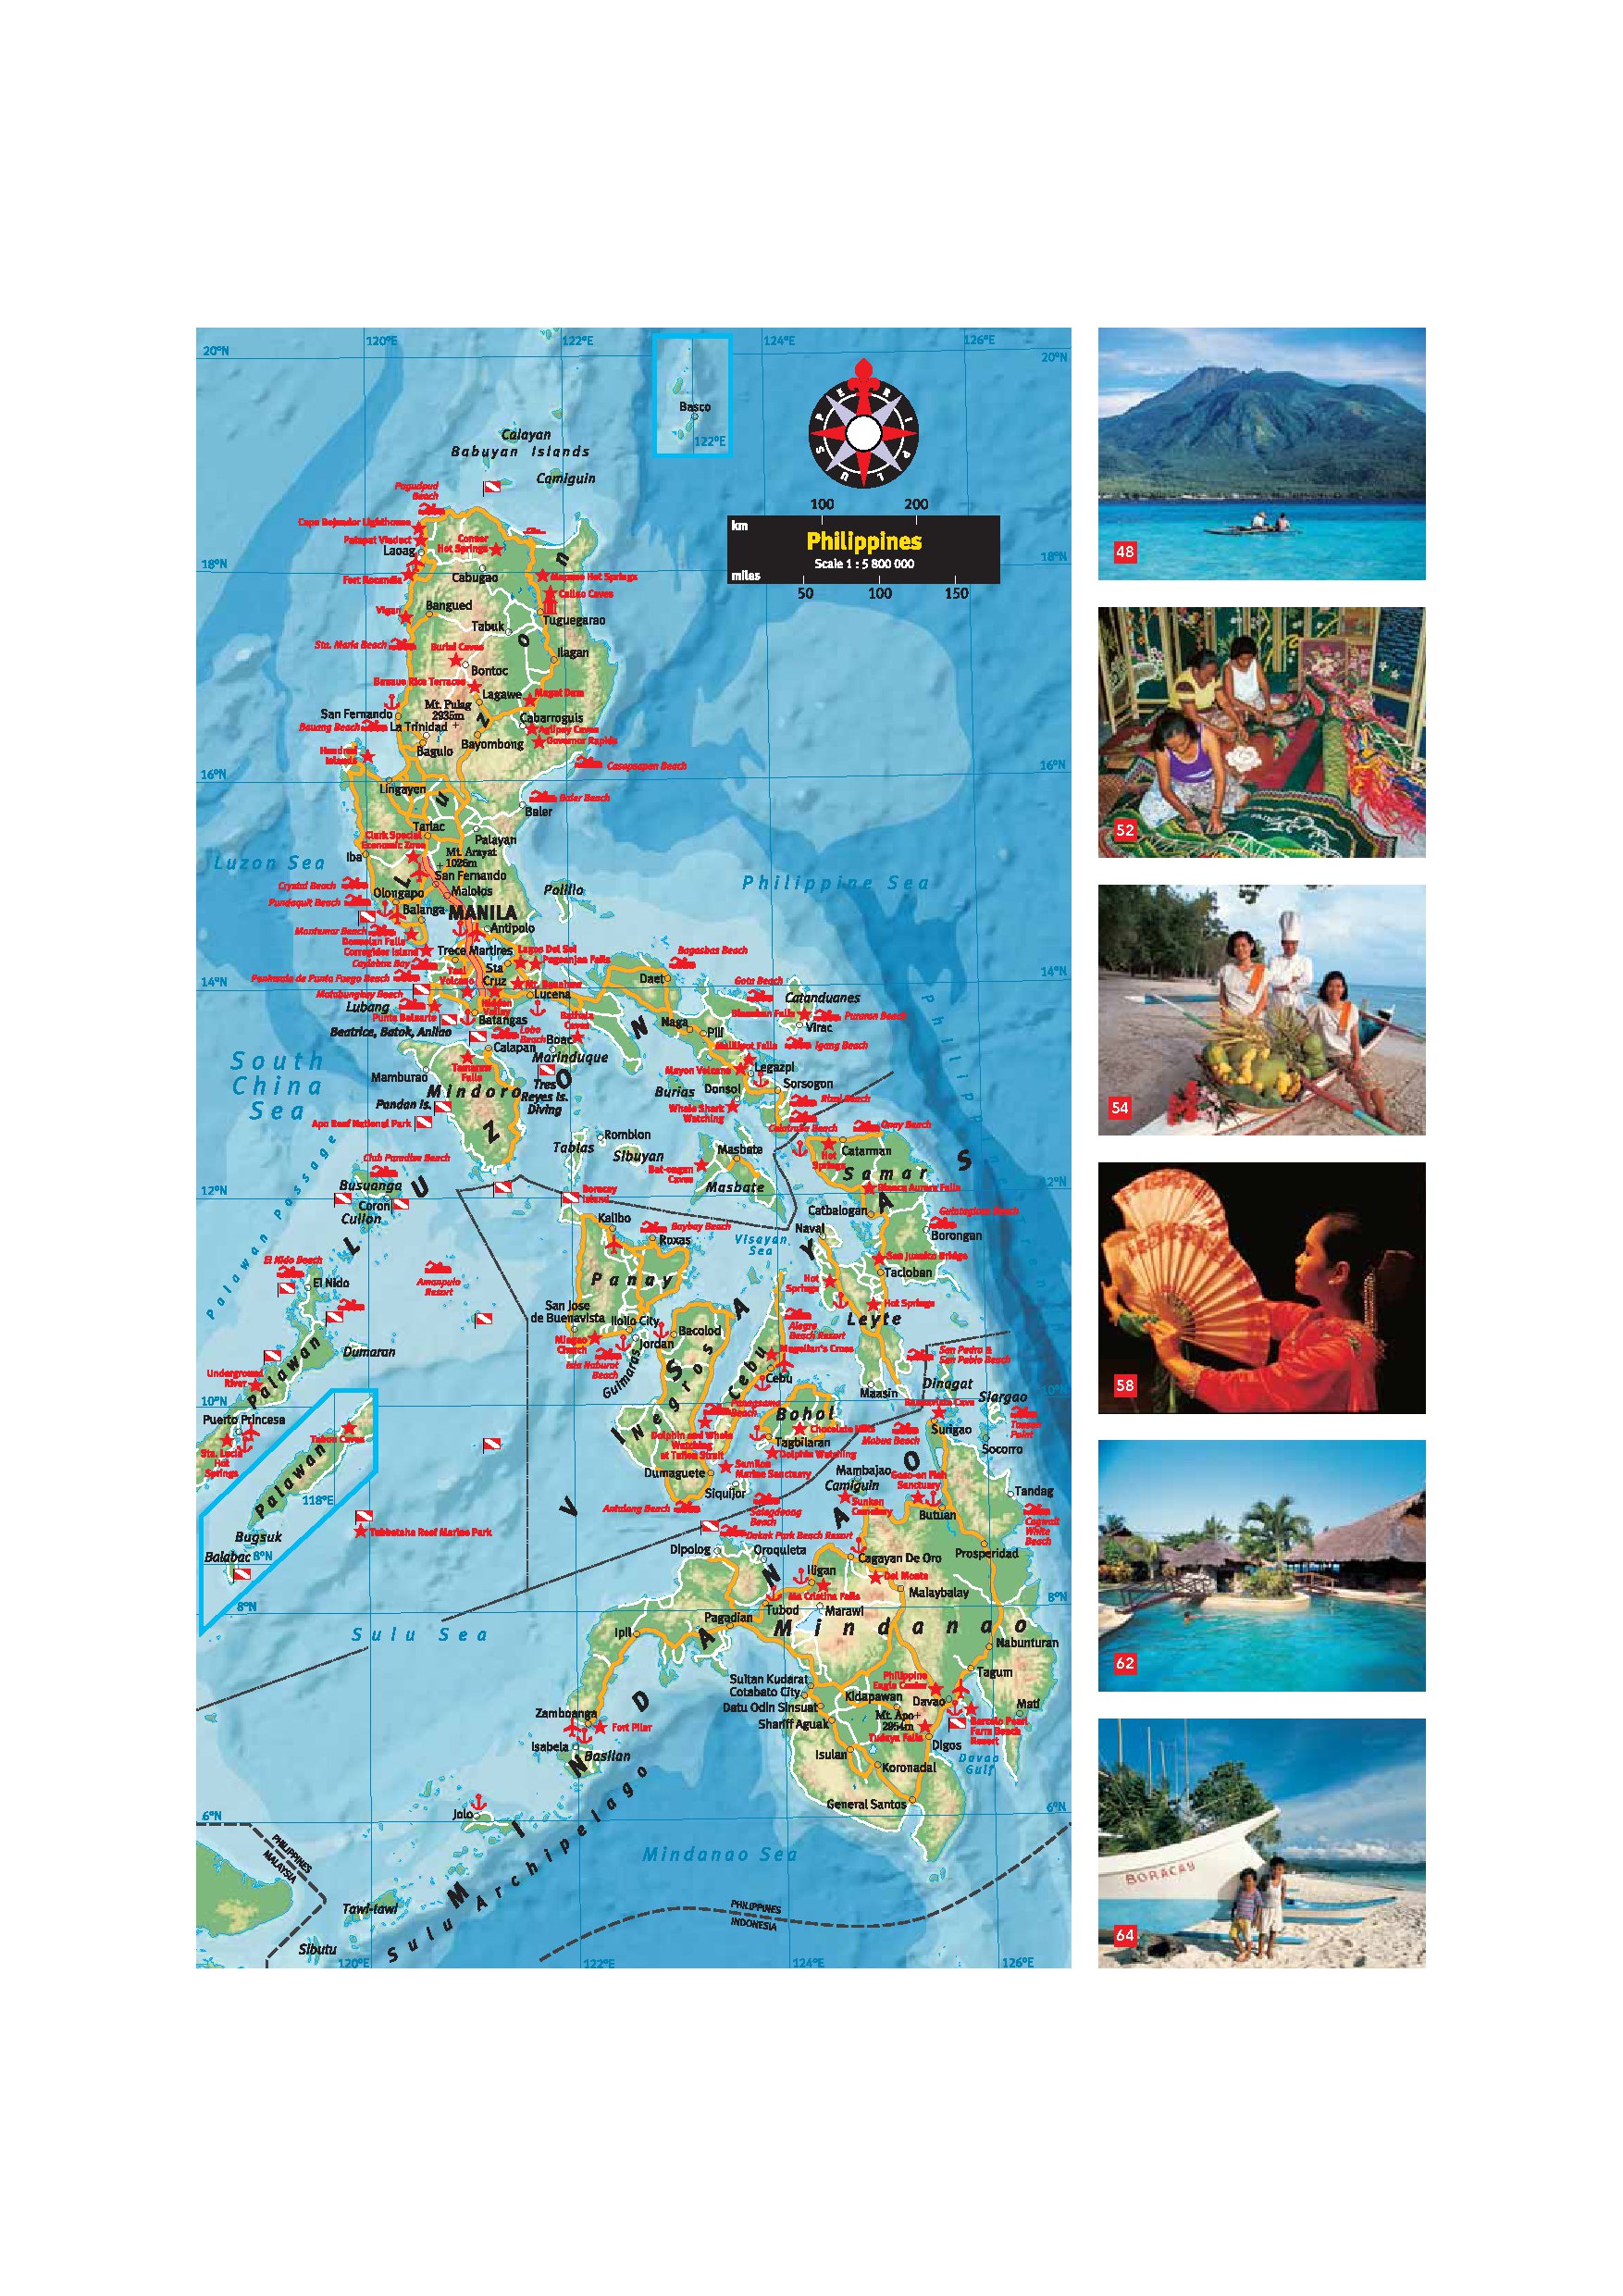 The Philippines: A Visual Journey